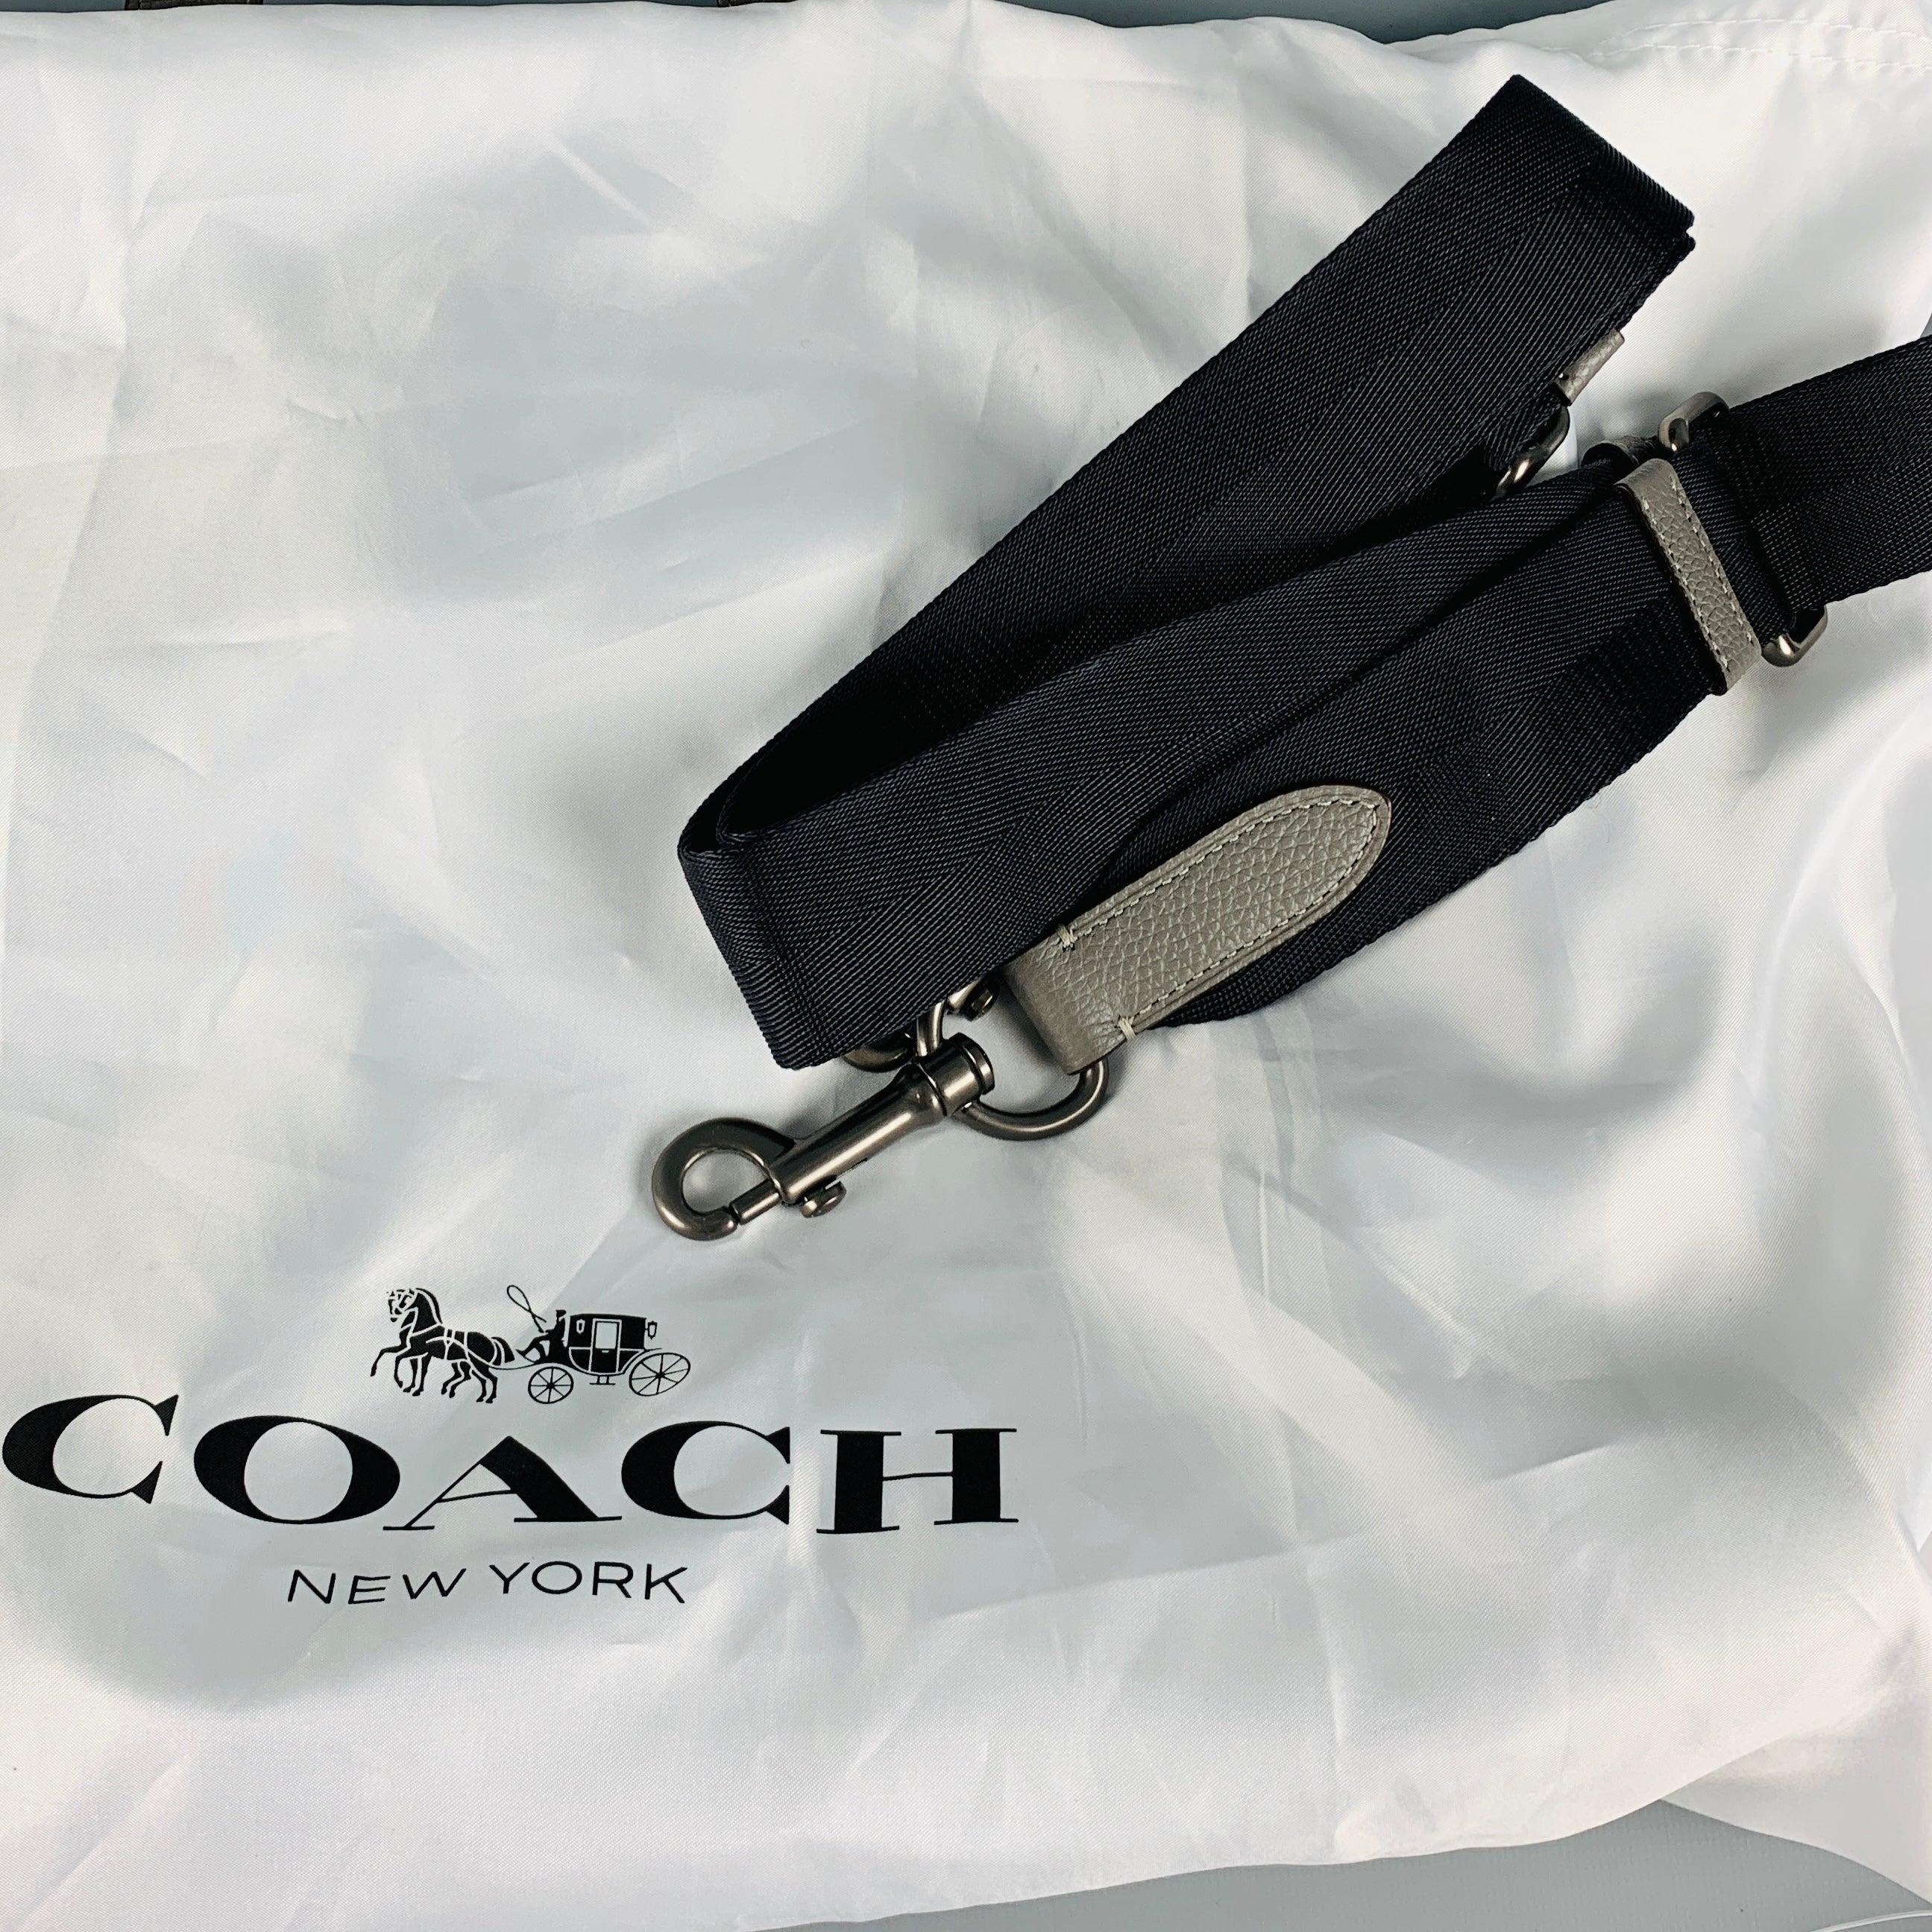 COACH Grey Pebble Grain Leather Tote Bag For Sale 7